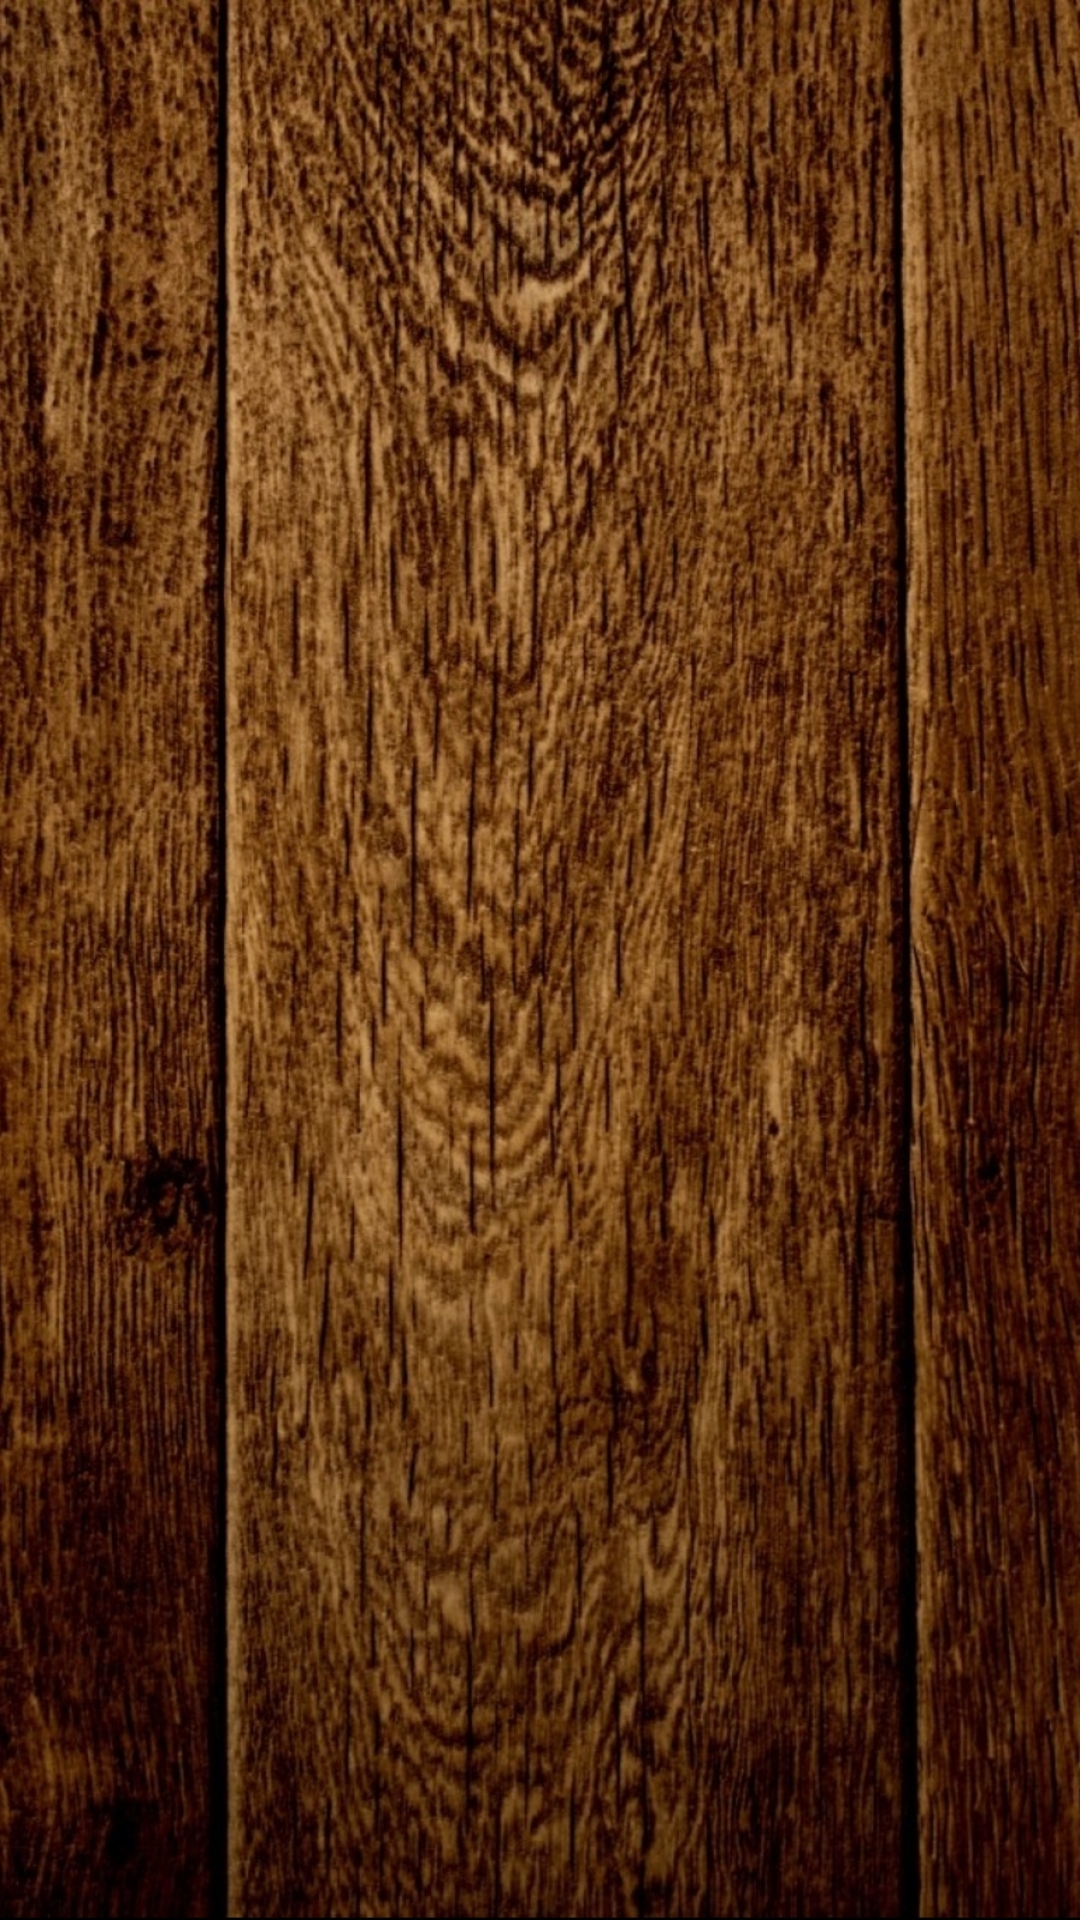 Artistic Wood Phone Wallpaper   Mobile Abyss